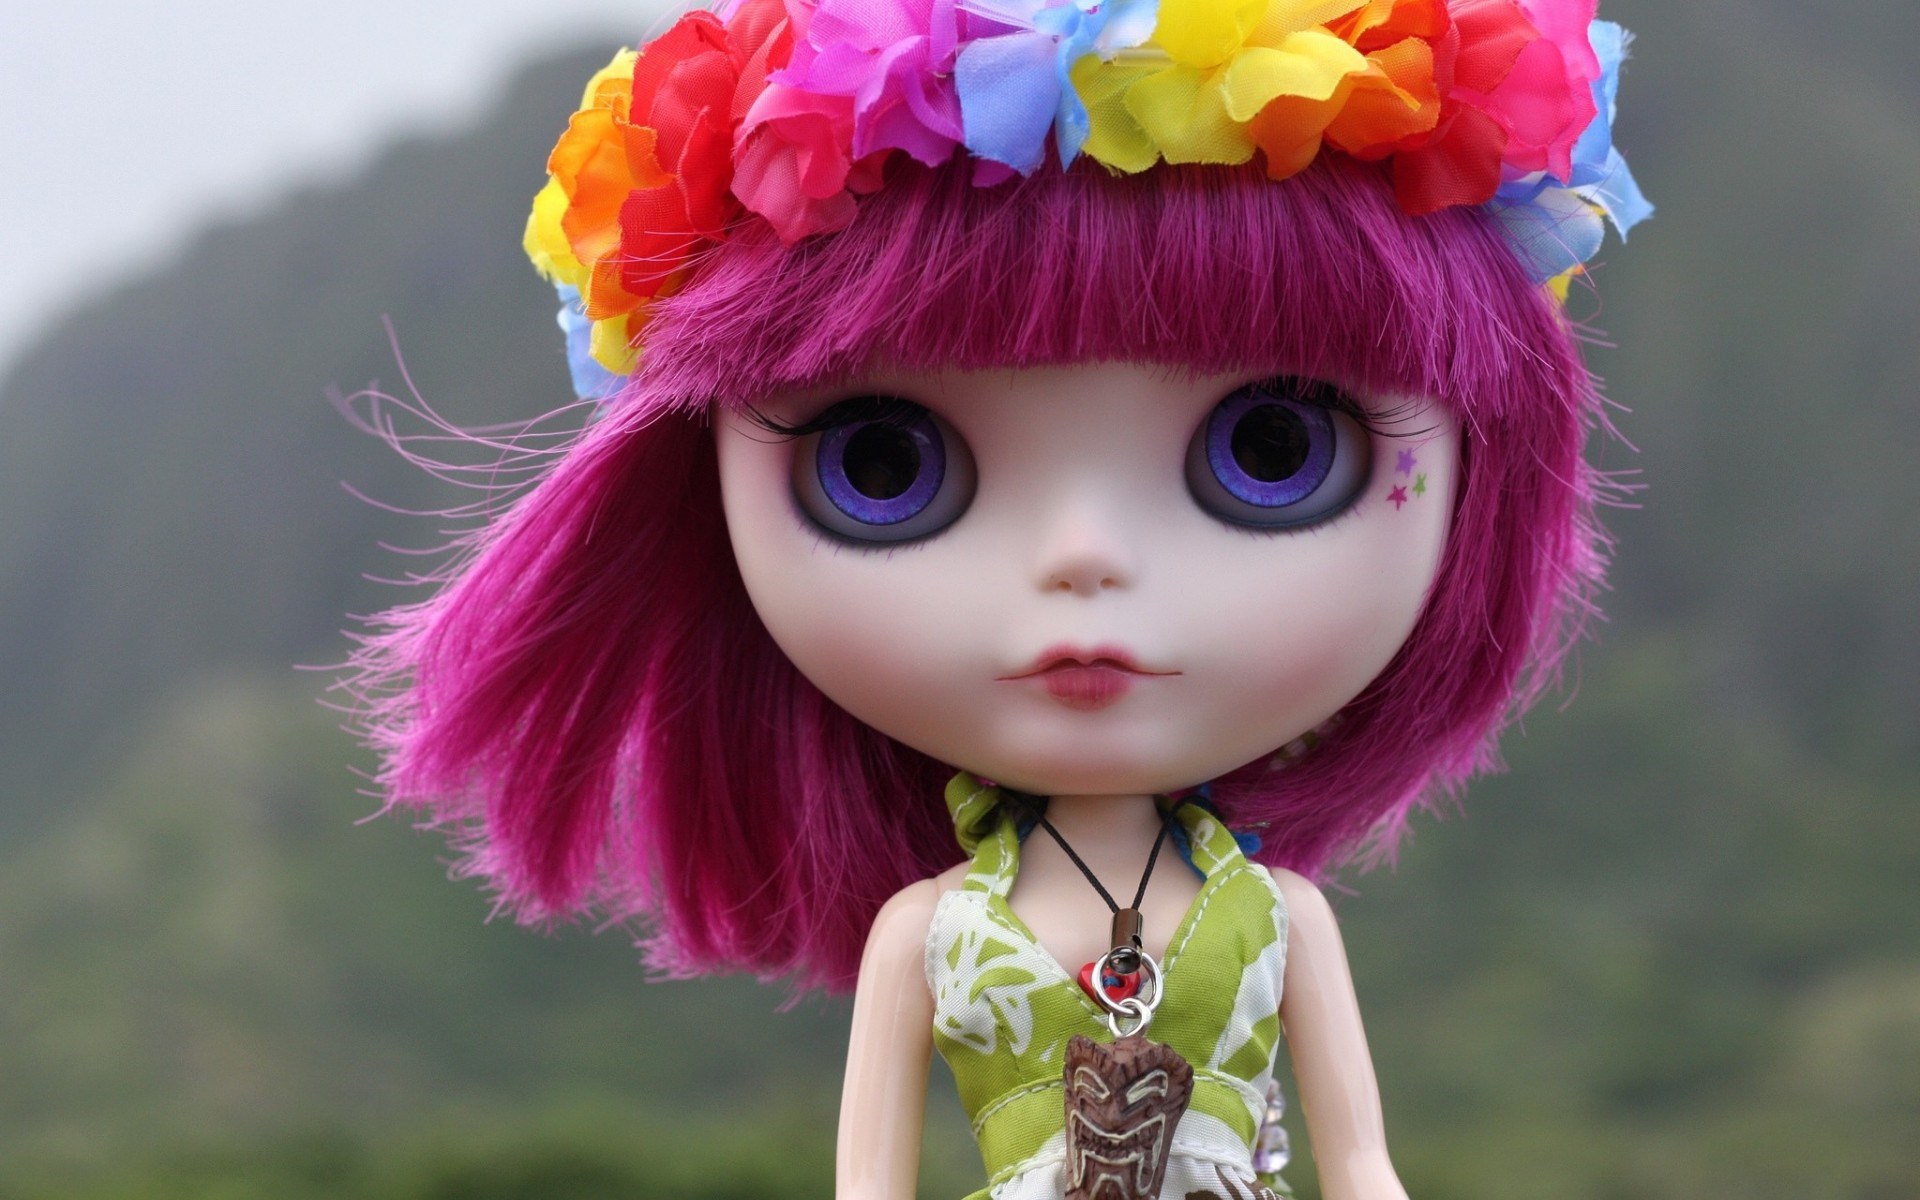 Colorful Images Of Dolls - HD Wallpaper 